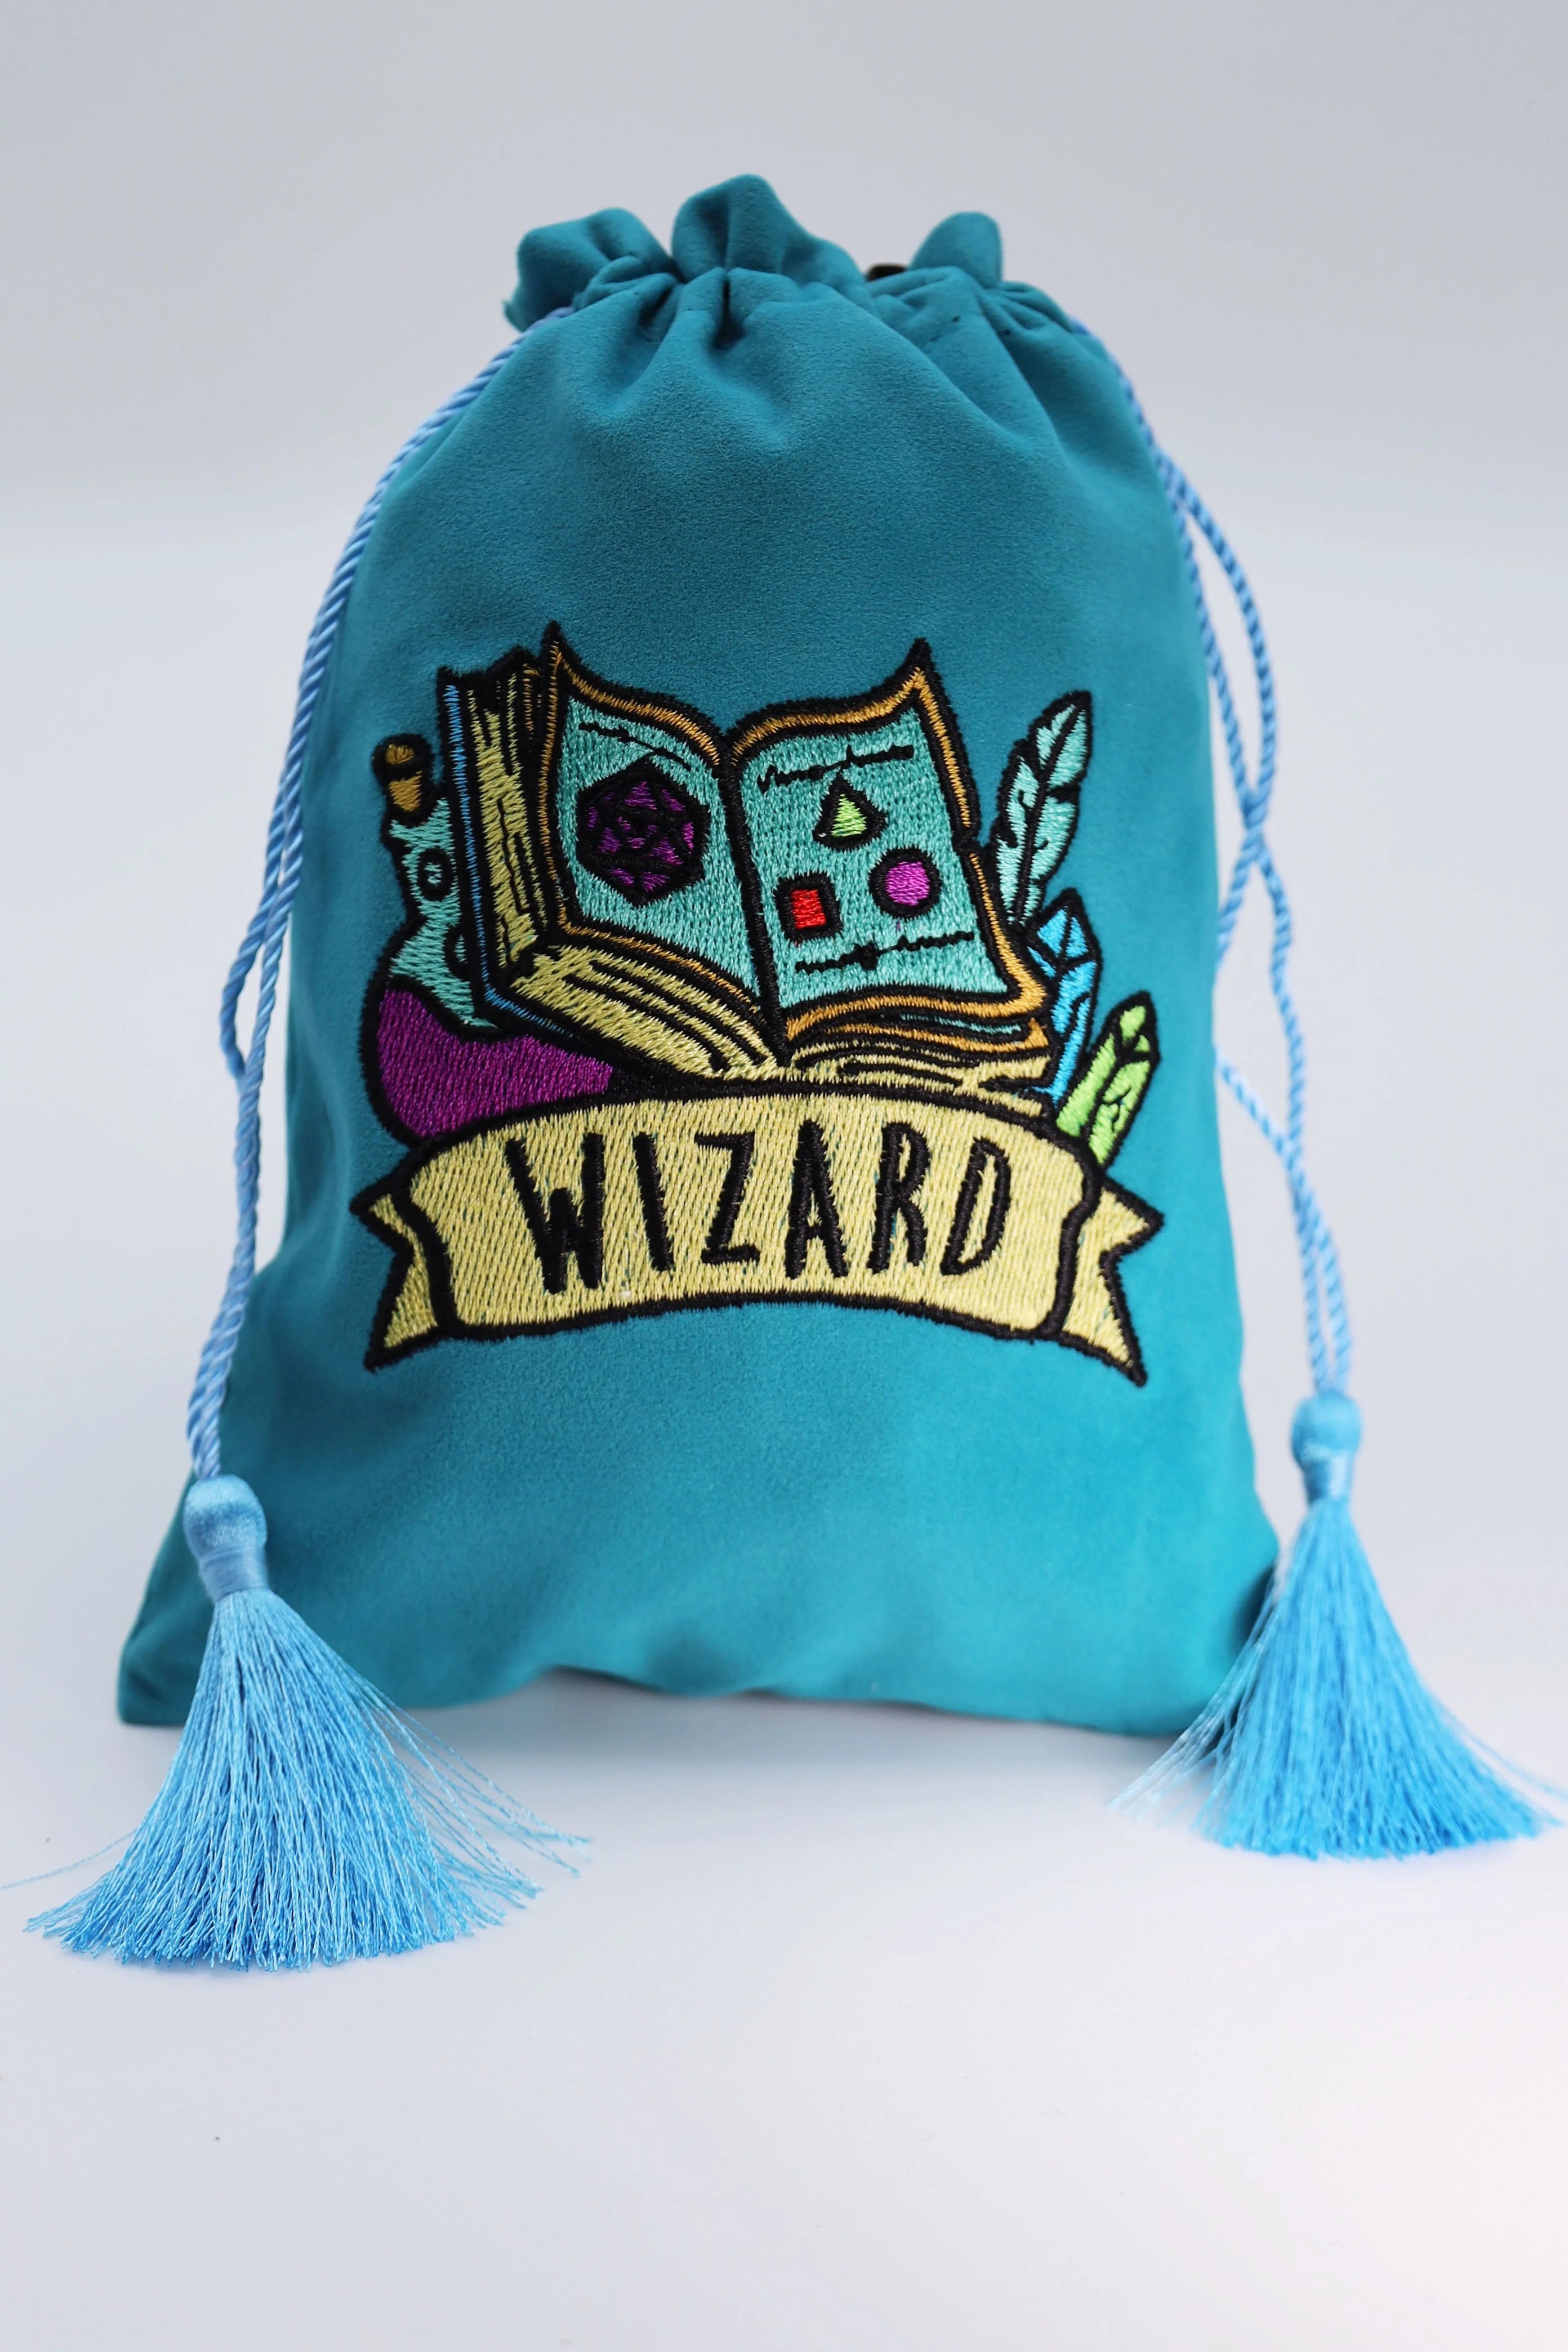 DICE BAG - WIZARD Dice & Counters Foam Brain Games    | Red Claw Gaming